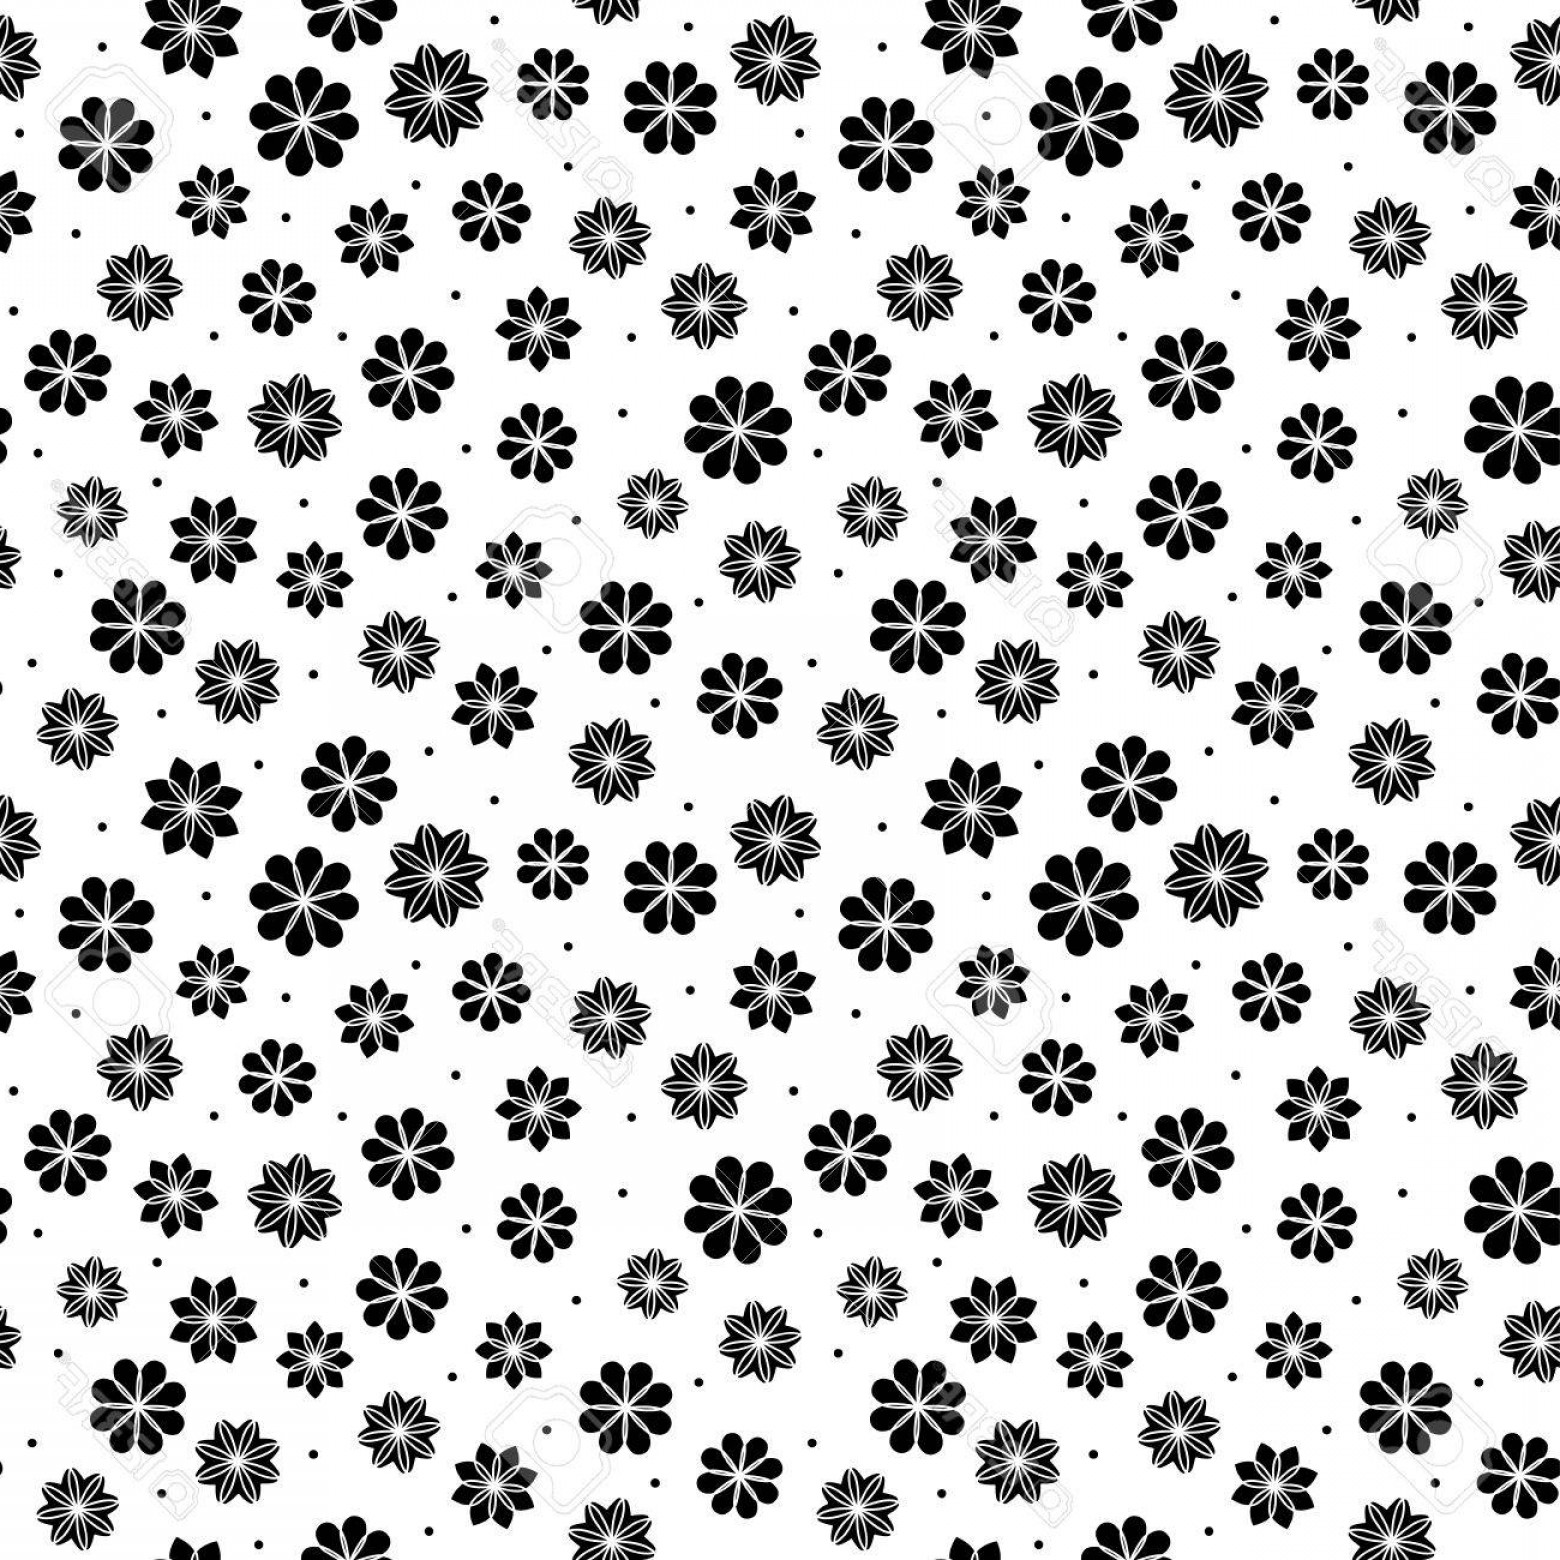 Floral Design Patterns Vector at Vectorified.com | Collection of Floral ...